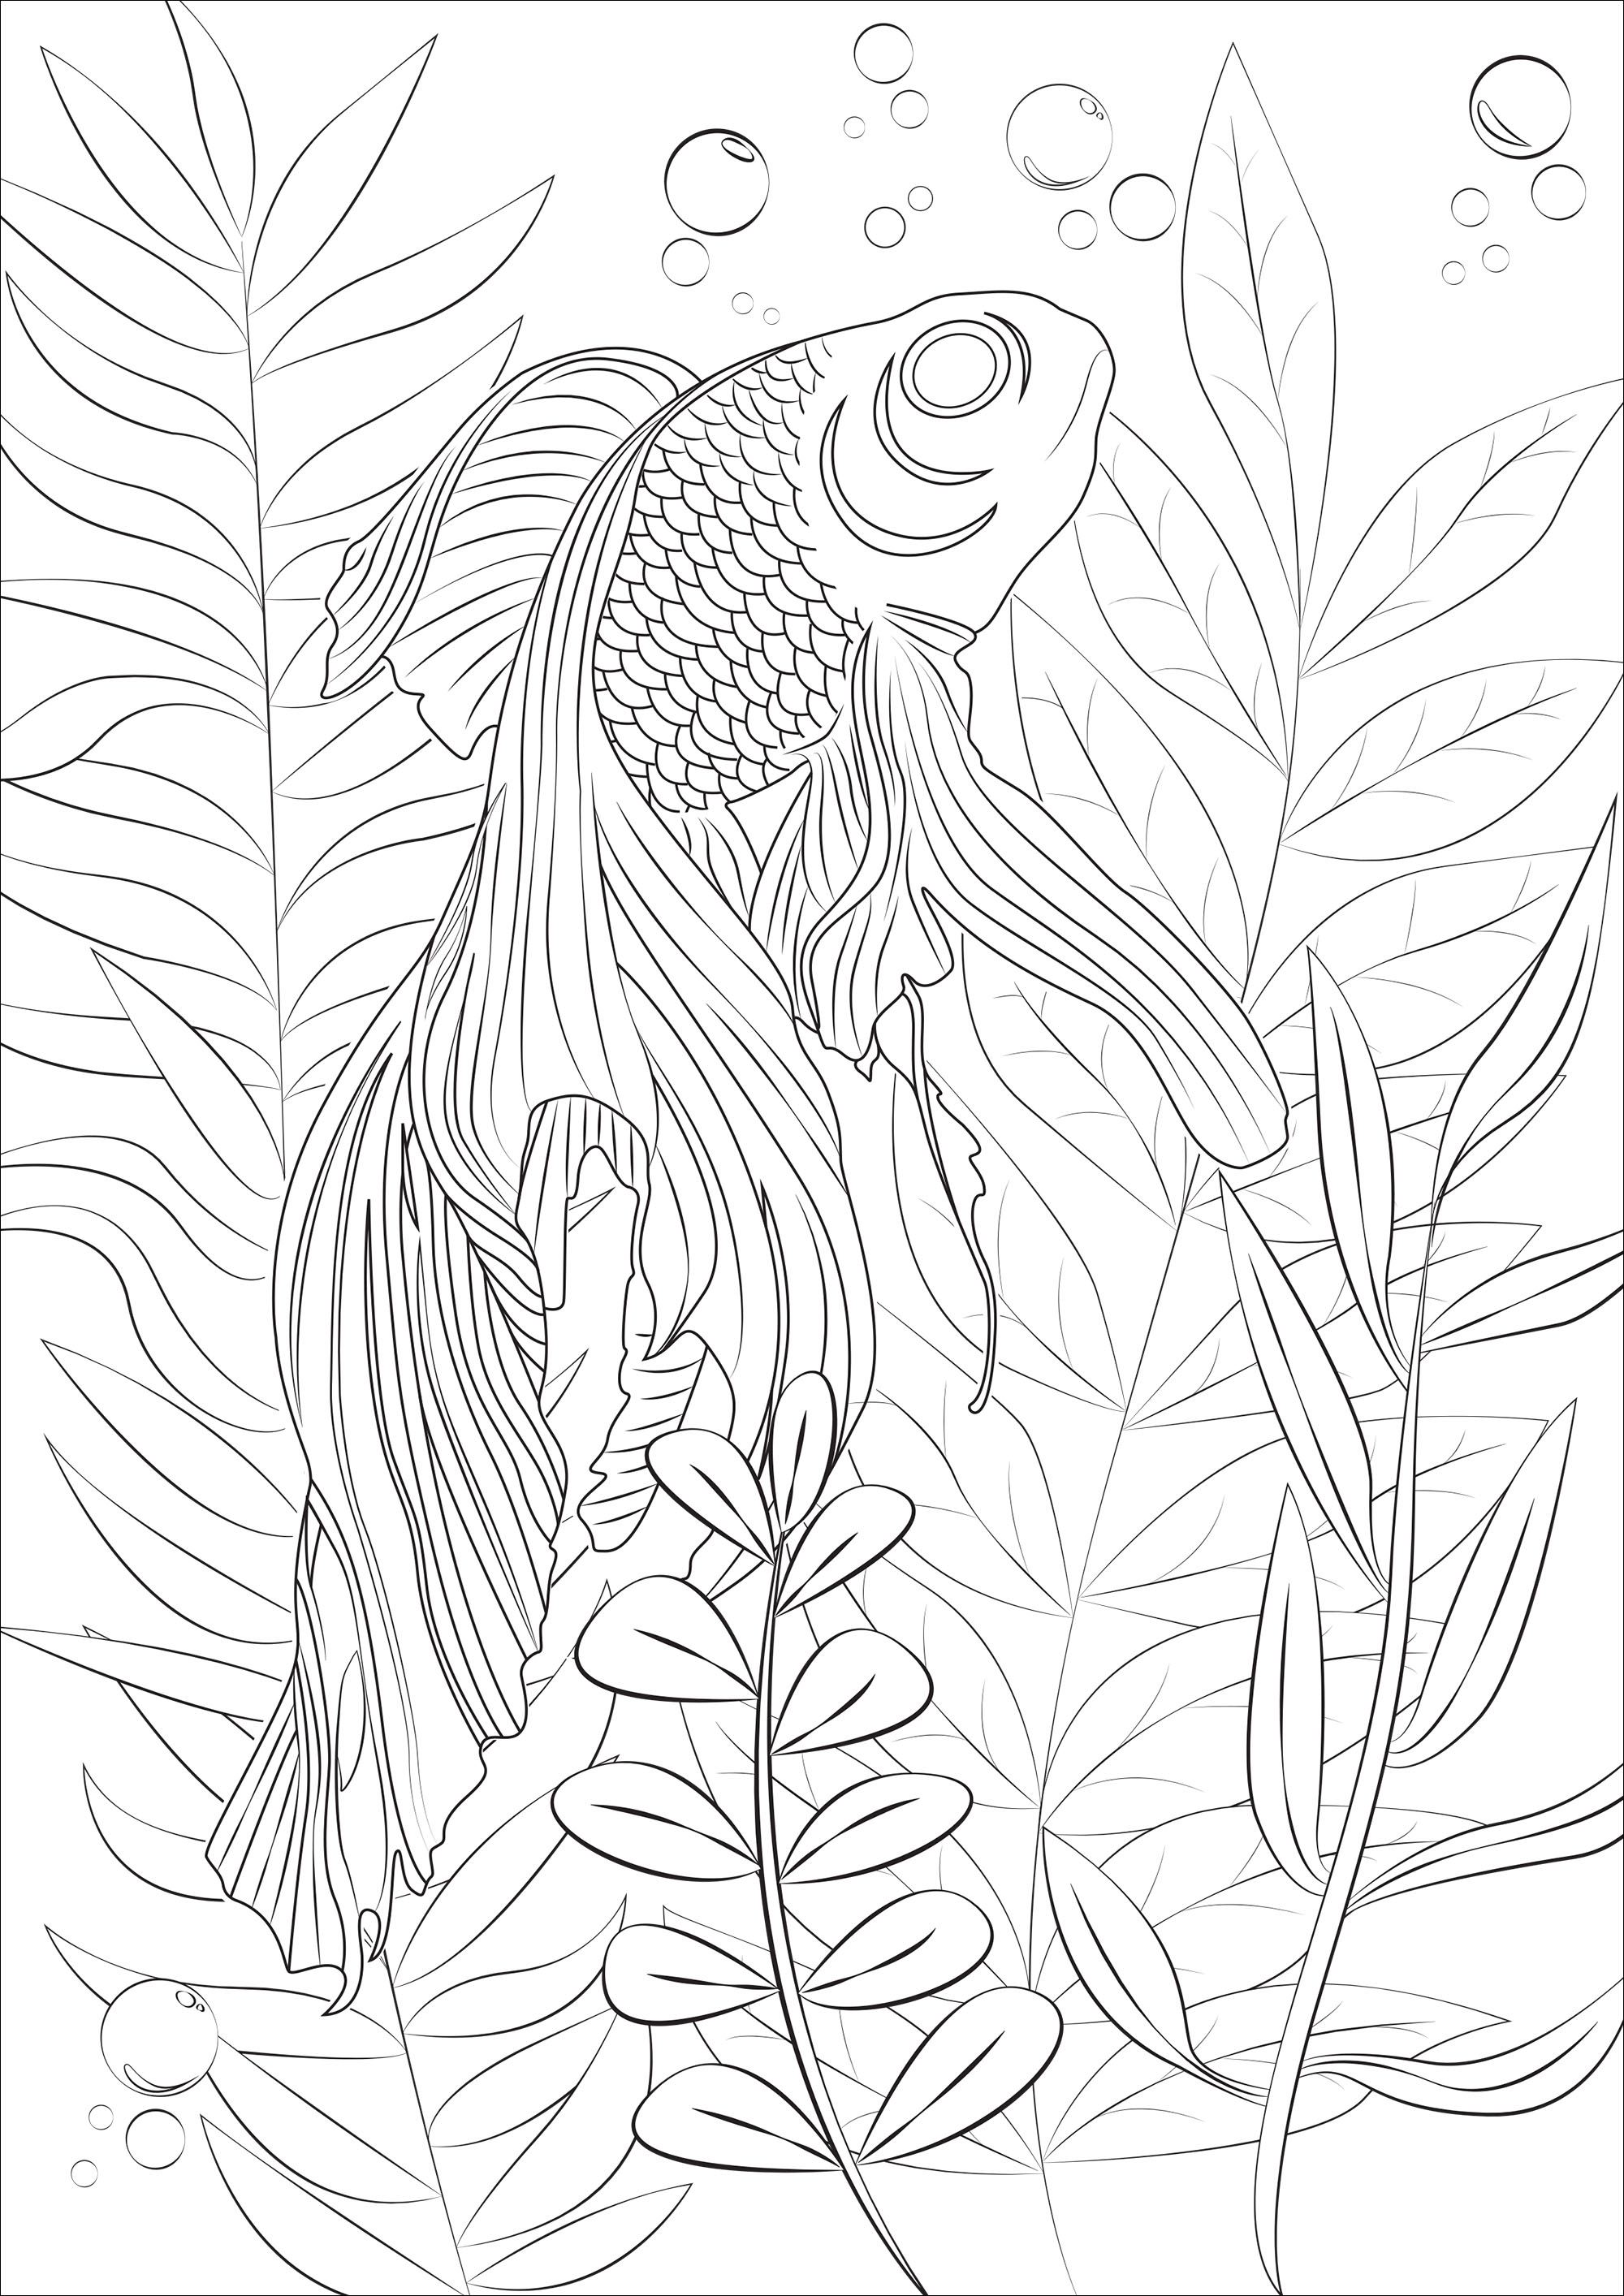 Goldfish in his natural setting - Fishes Adult Coloring Pages